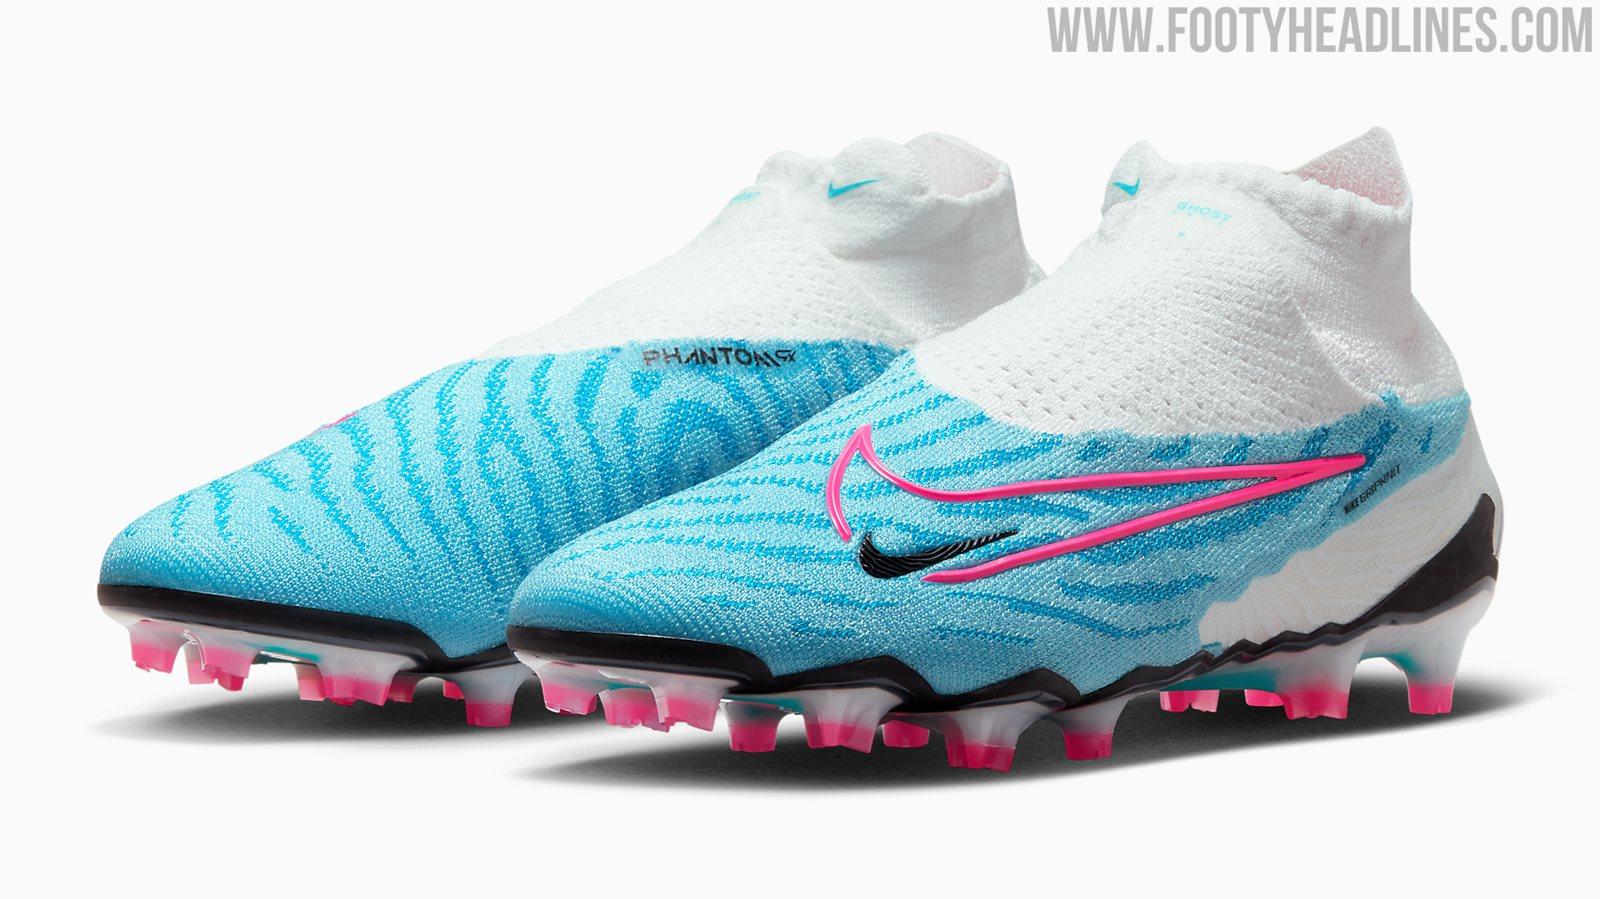 First Nike Phantom Gx On Pitch Boots Released Footy Headlines